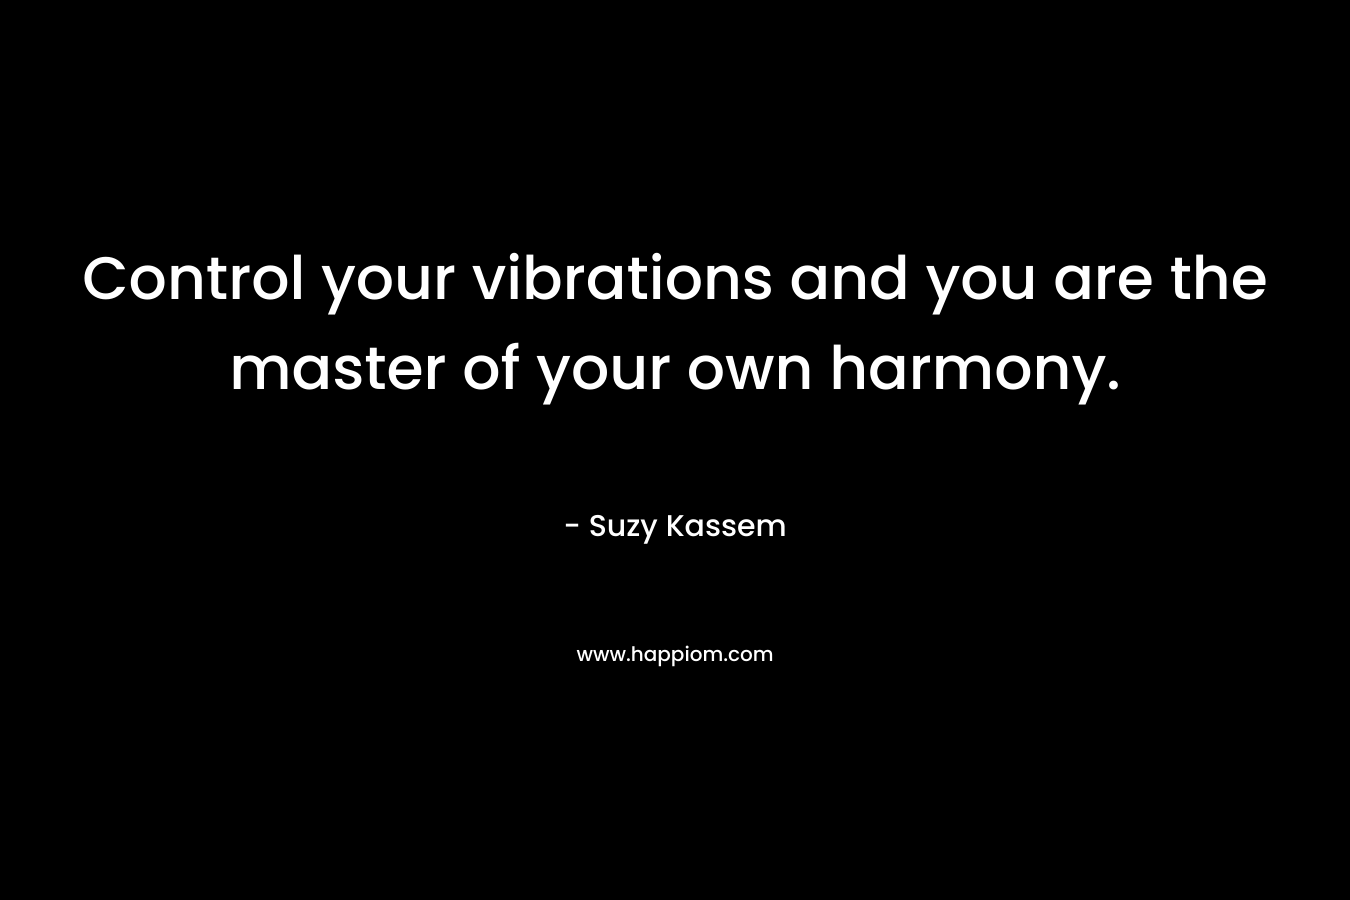 Control your vibrations and you are the master of your own harmony.